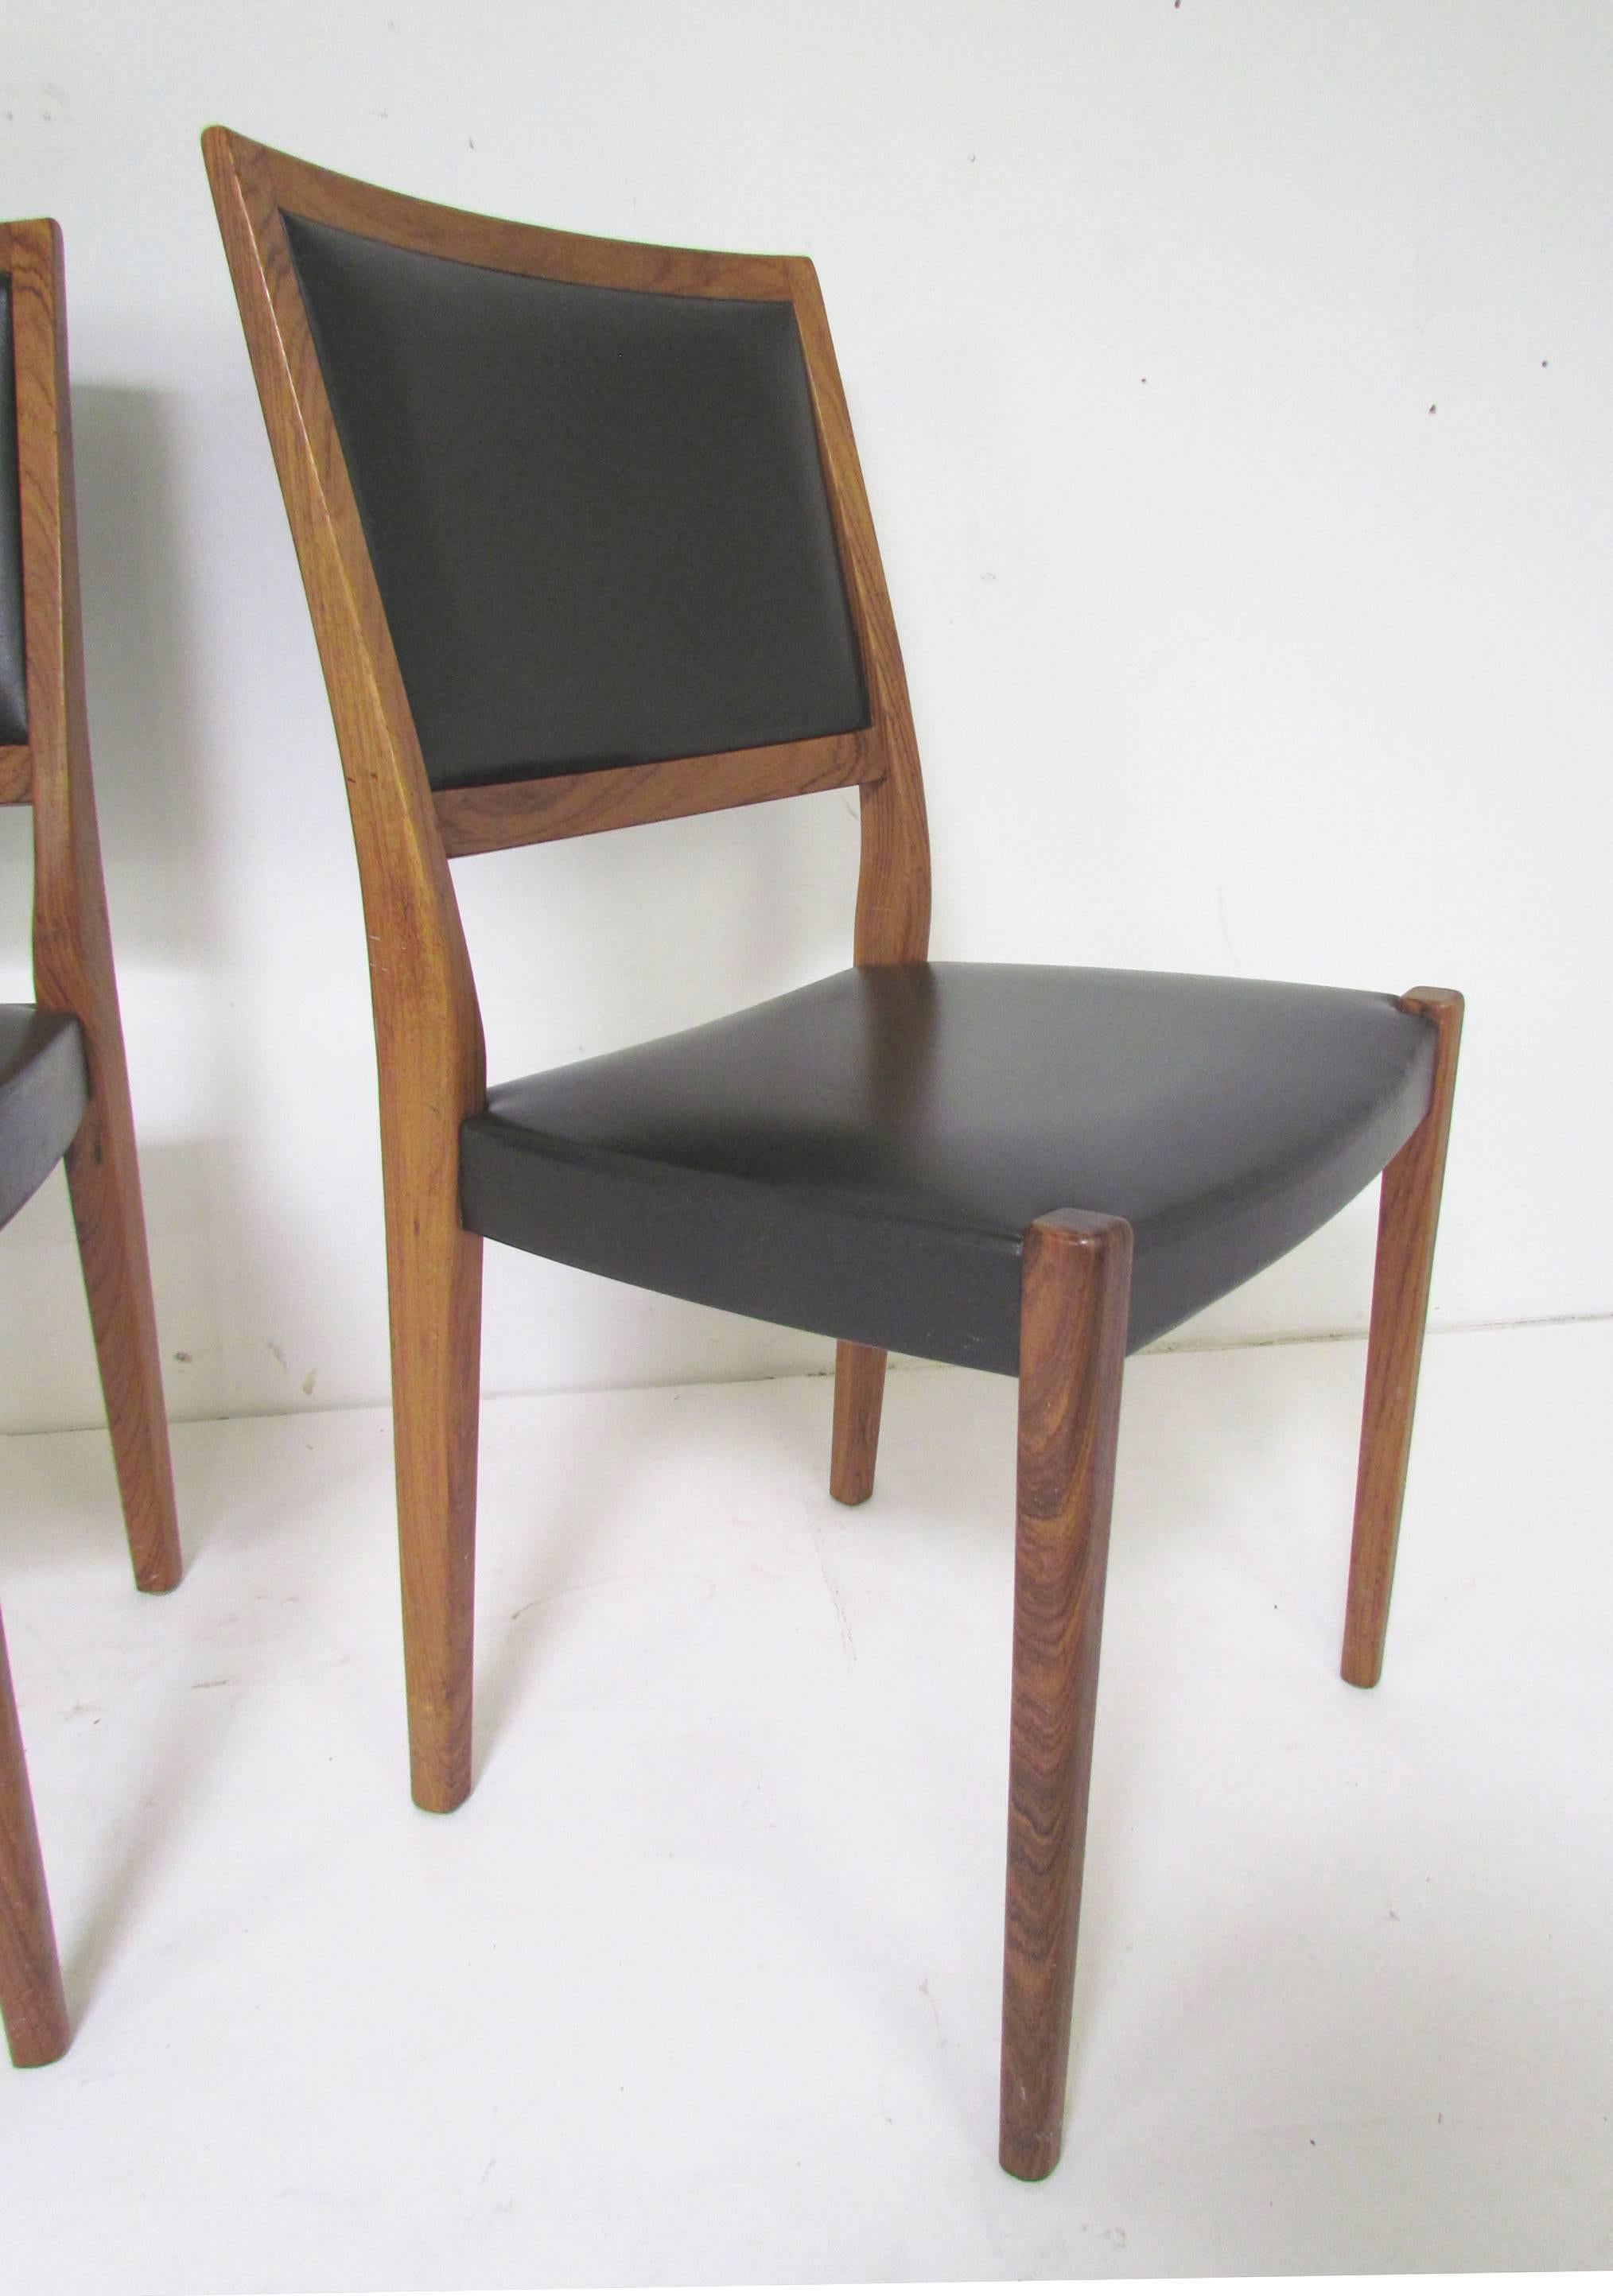 Set of six rosewood dining chairs by Svegards, made in Sweden, circa 1970s. 

